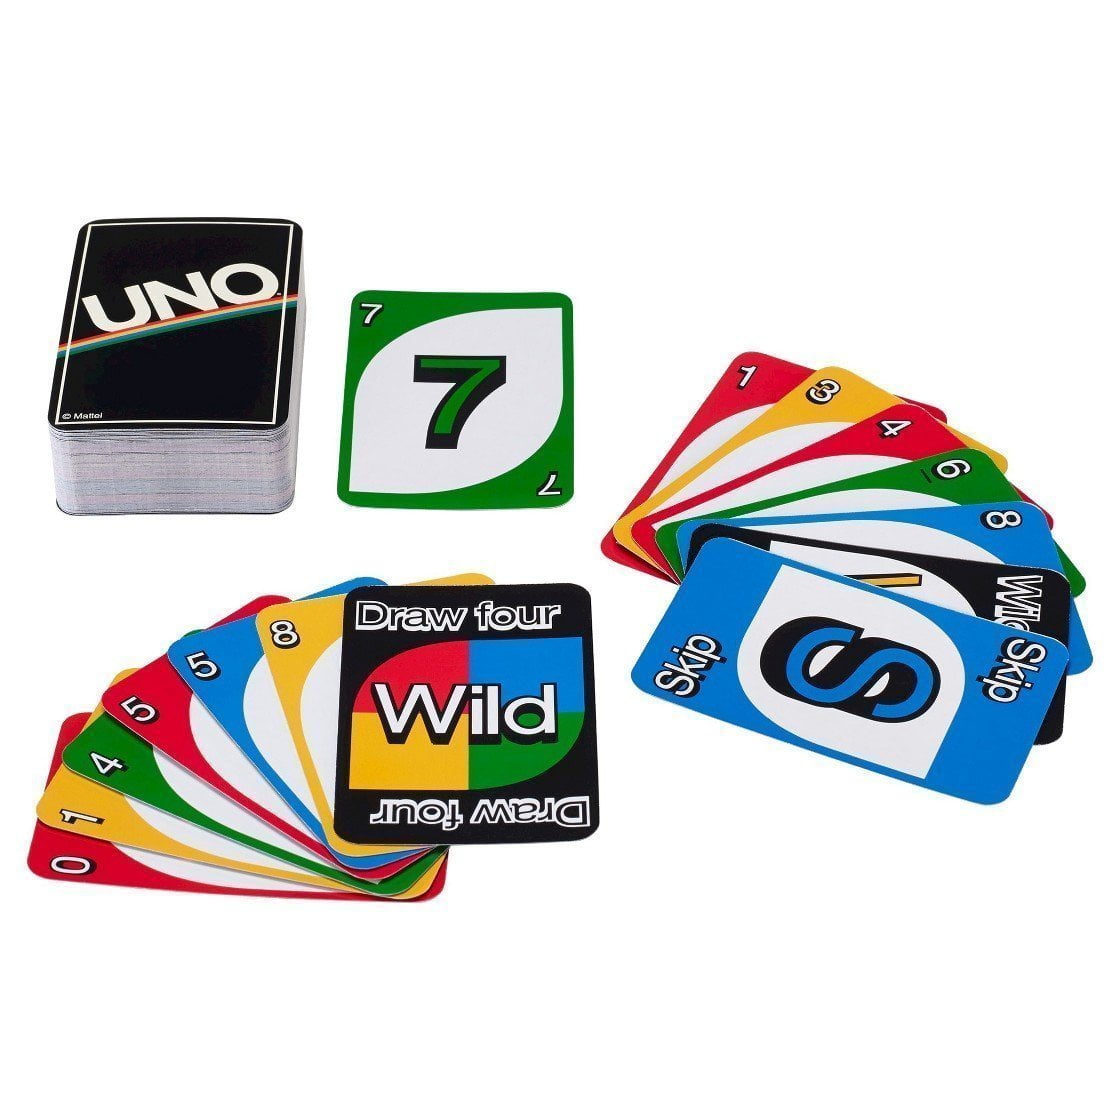 UNO Online - classic card game from GoGy free online games